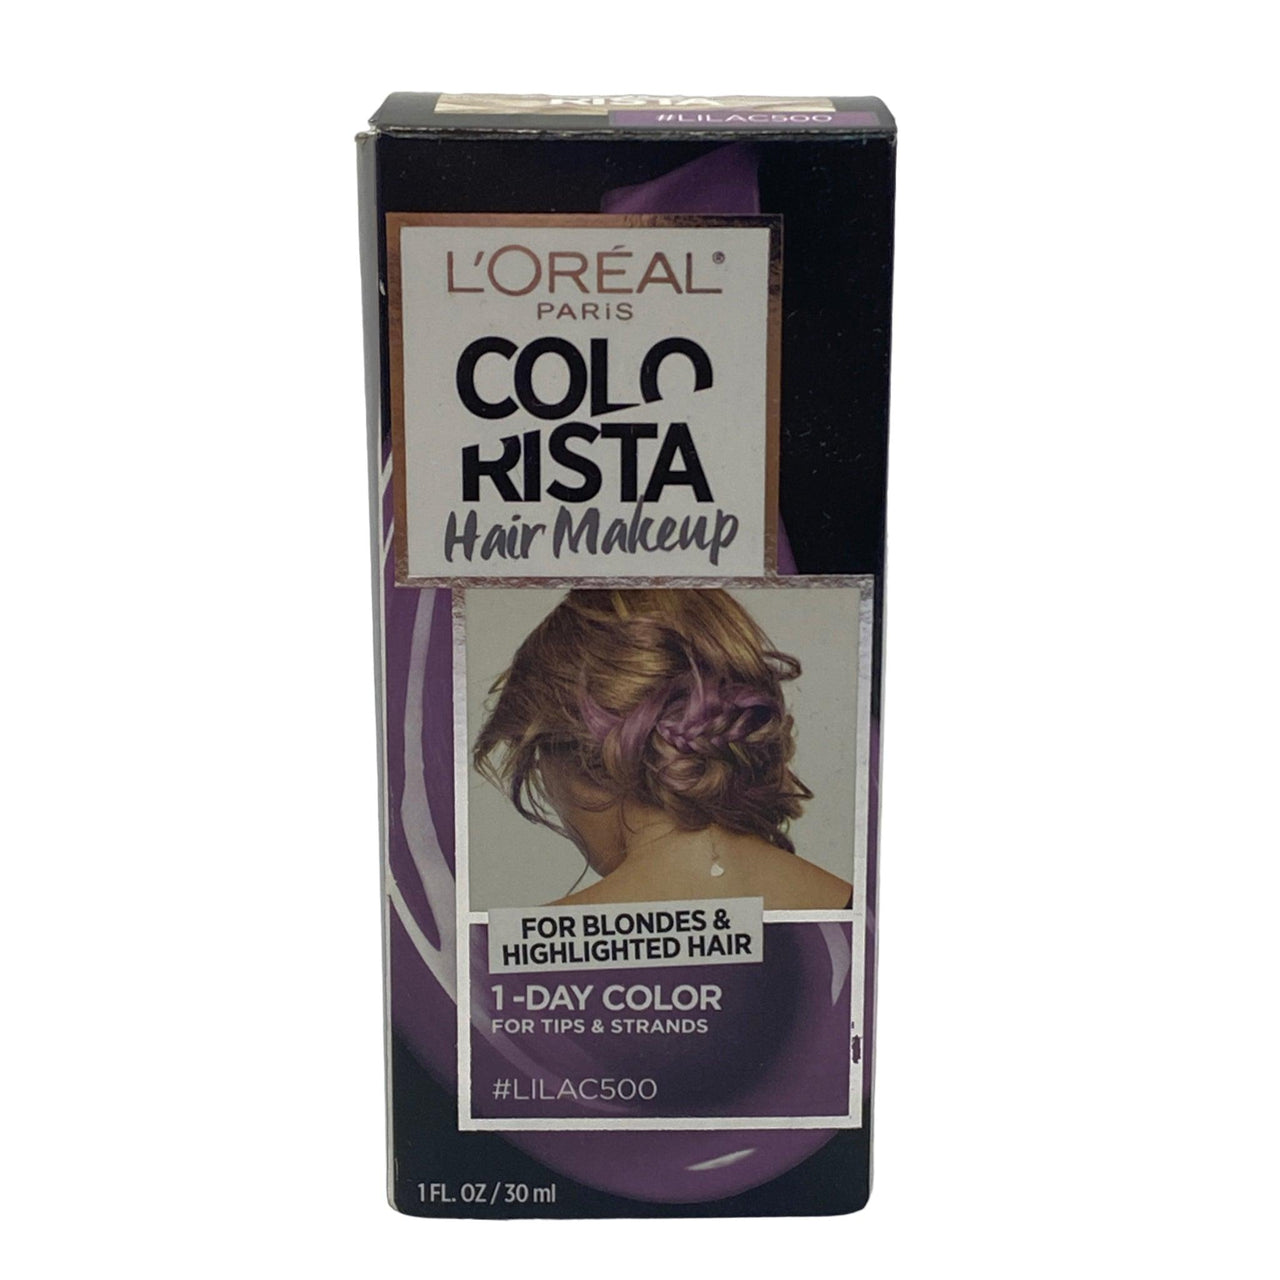 L’Oréal Colorista Makeup 1-day for Blondes & Highlighted (50 Pcs Box) - Discount Wholesalers Inc